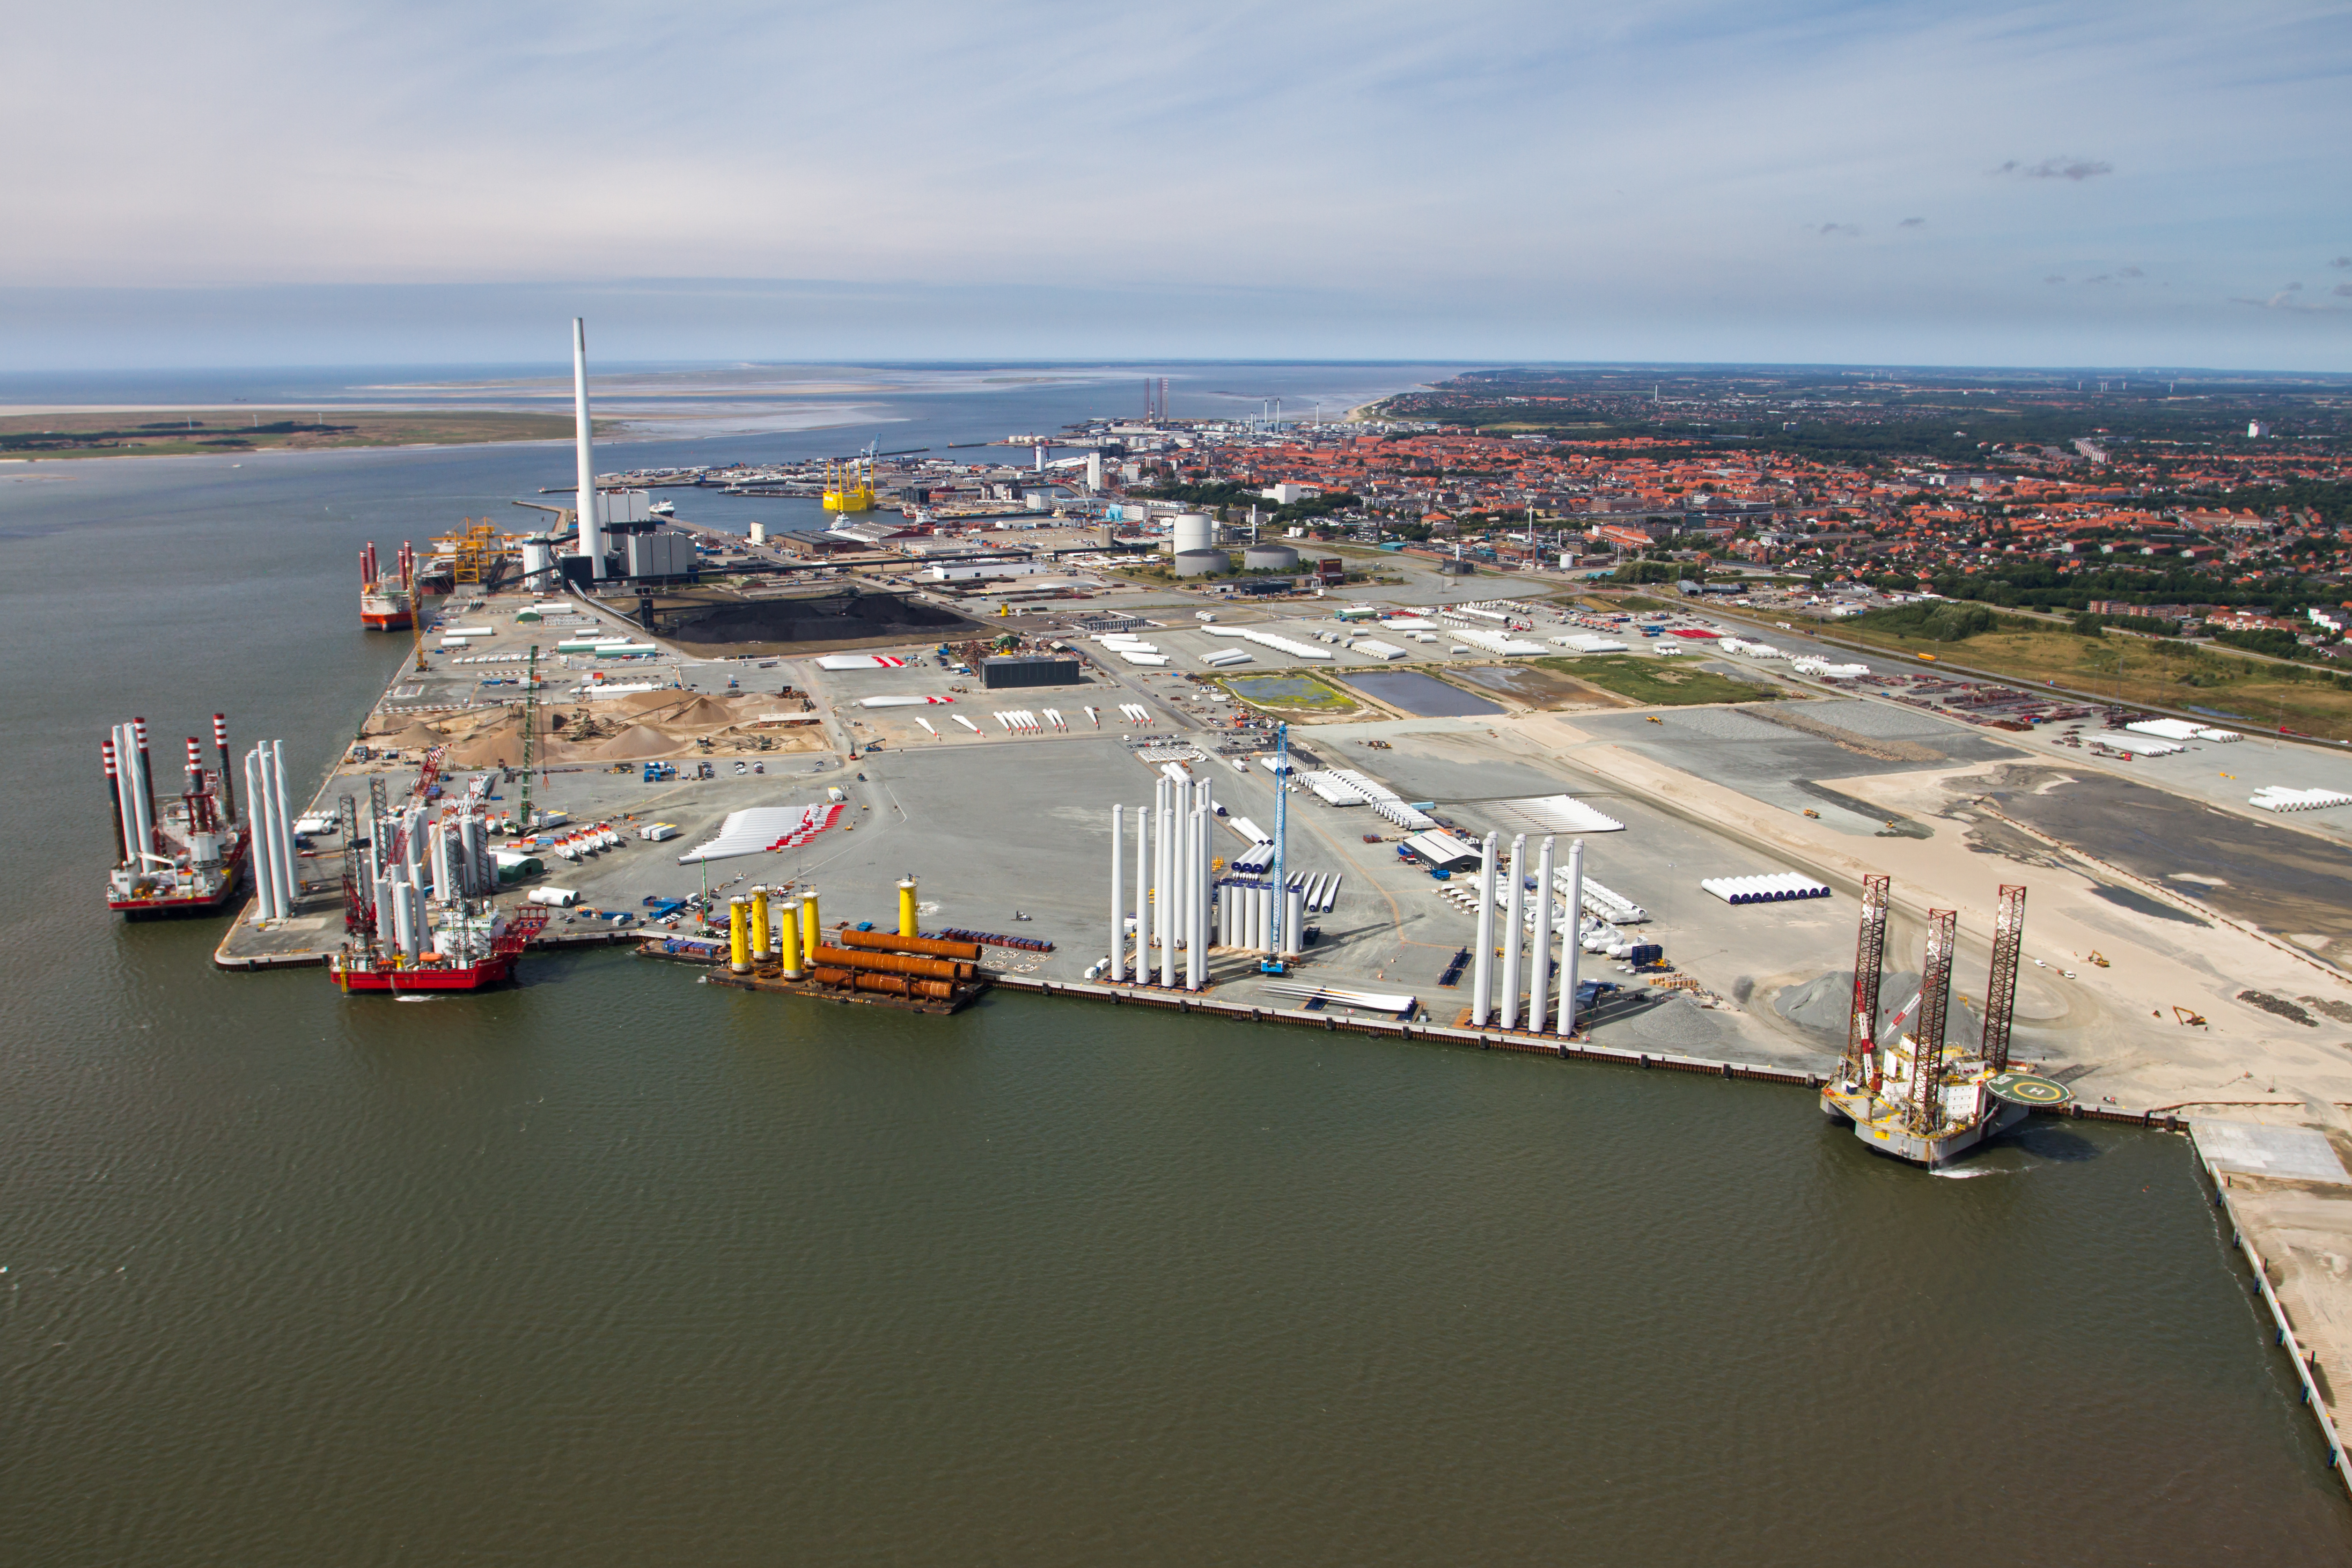 Aerial view of the harbor with wind turbines